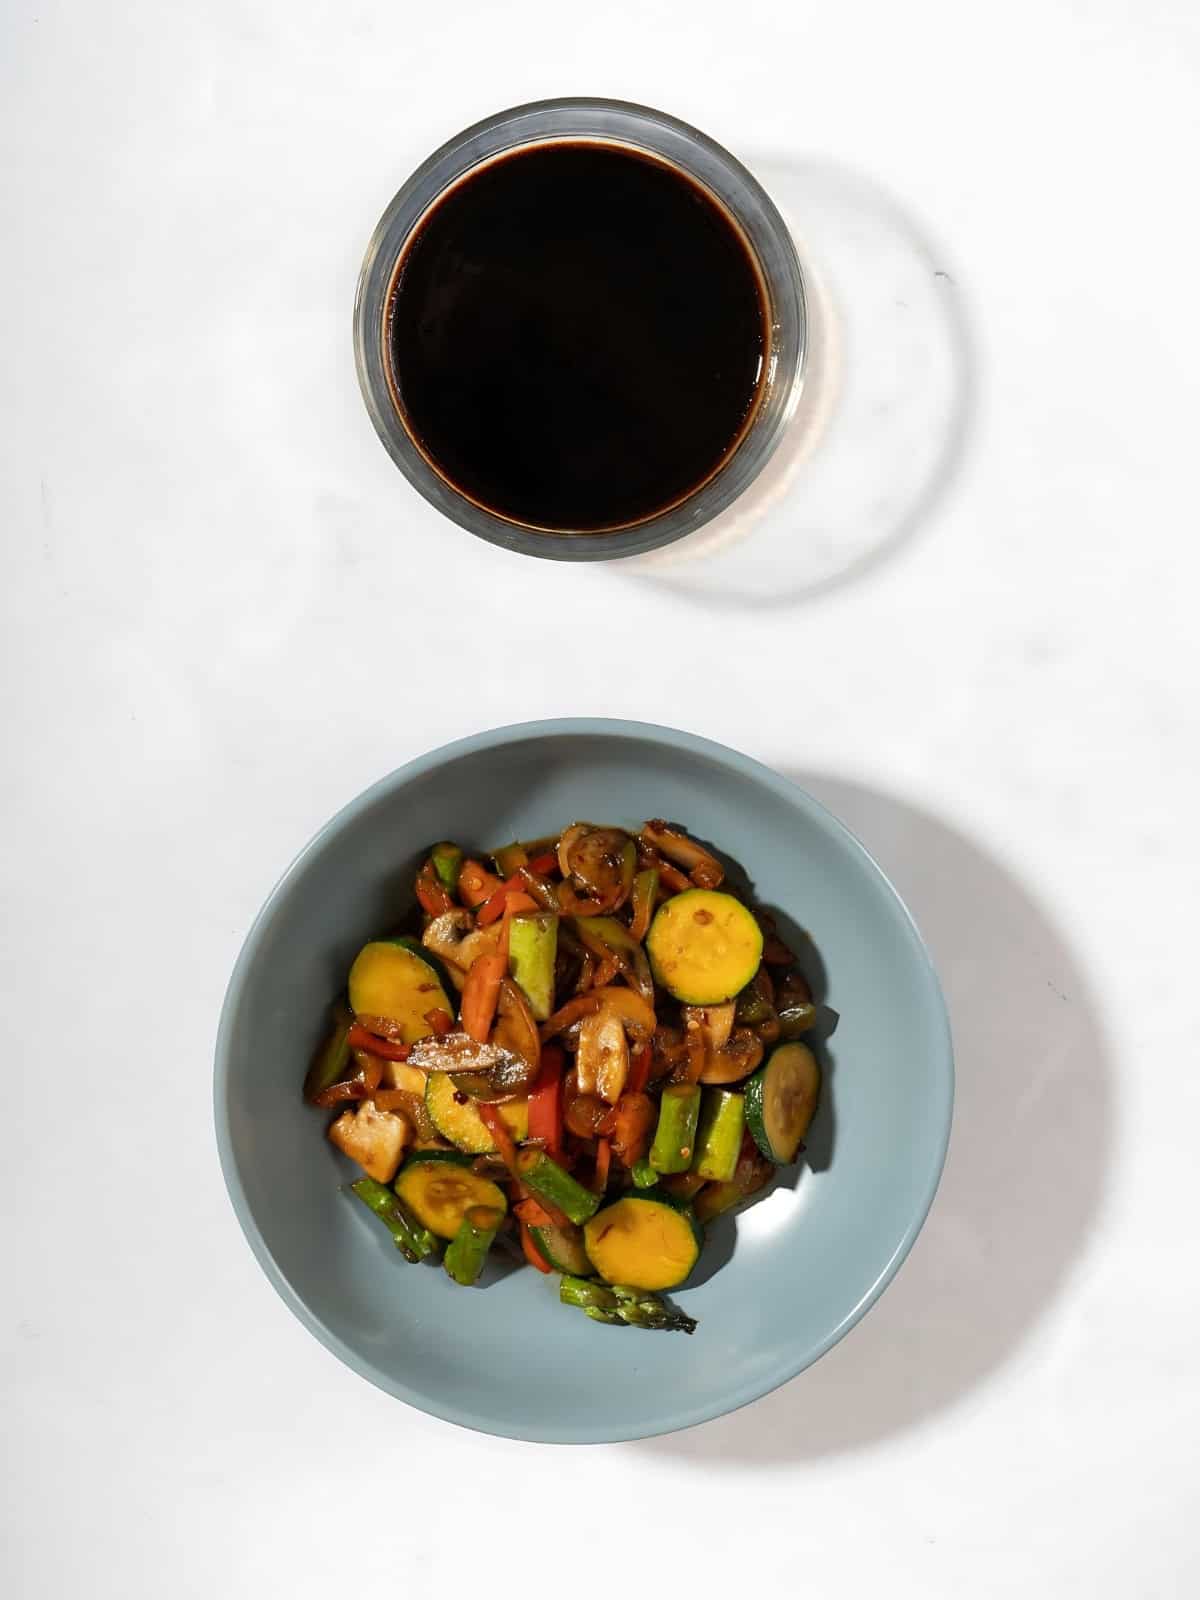 A small sauce bowl of vegan stir-fry sauce next to a bowl of fried vegetables.